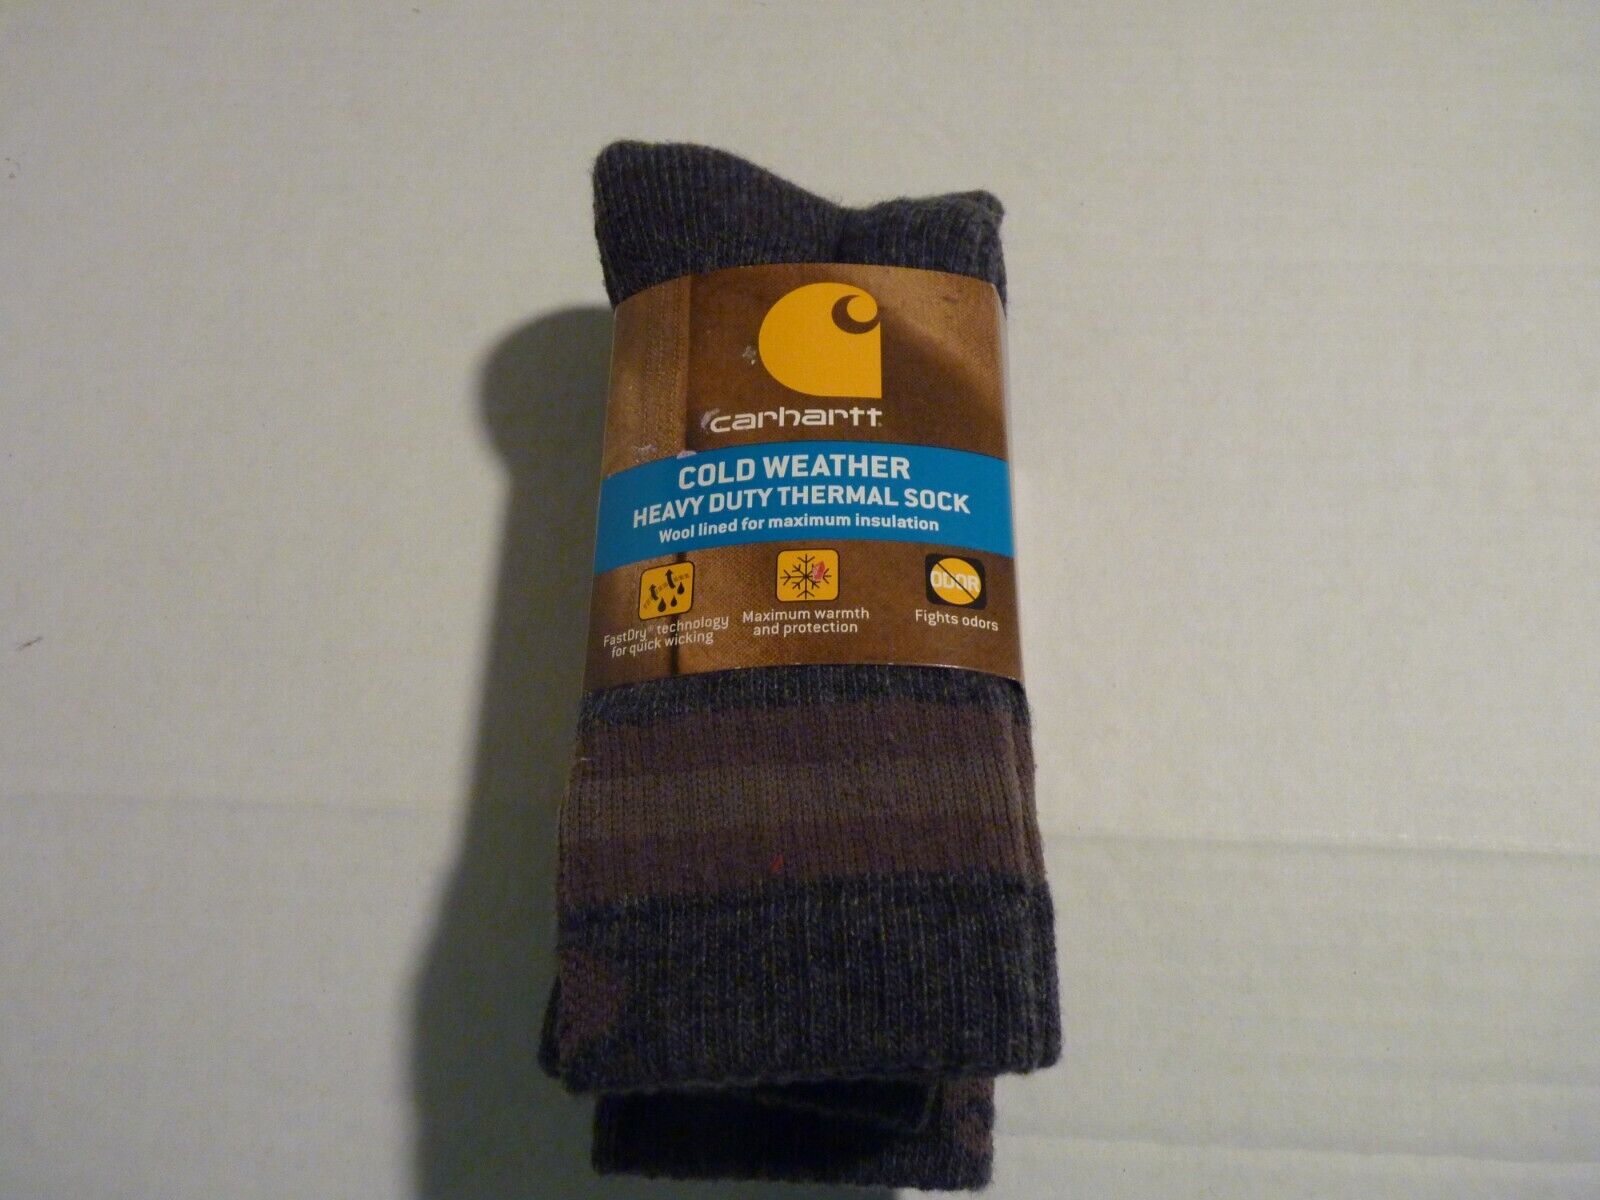 WOMENS CARHART COLD WEATHERHEAVY DUTY THERMAL SOCKS-2 PAIRS SIZE M 9-11 NWT